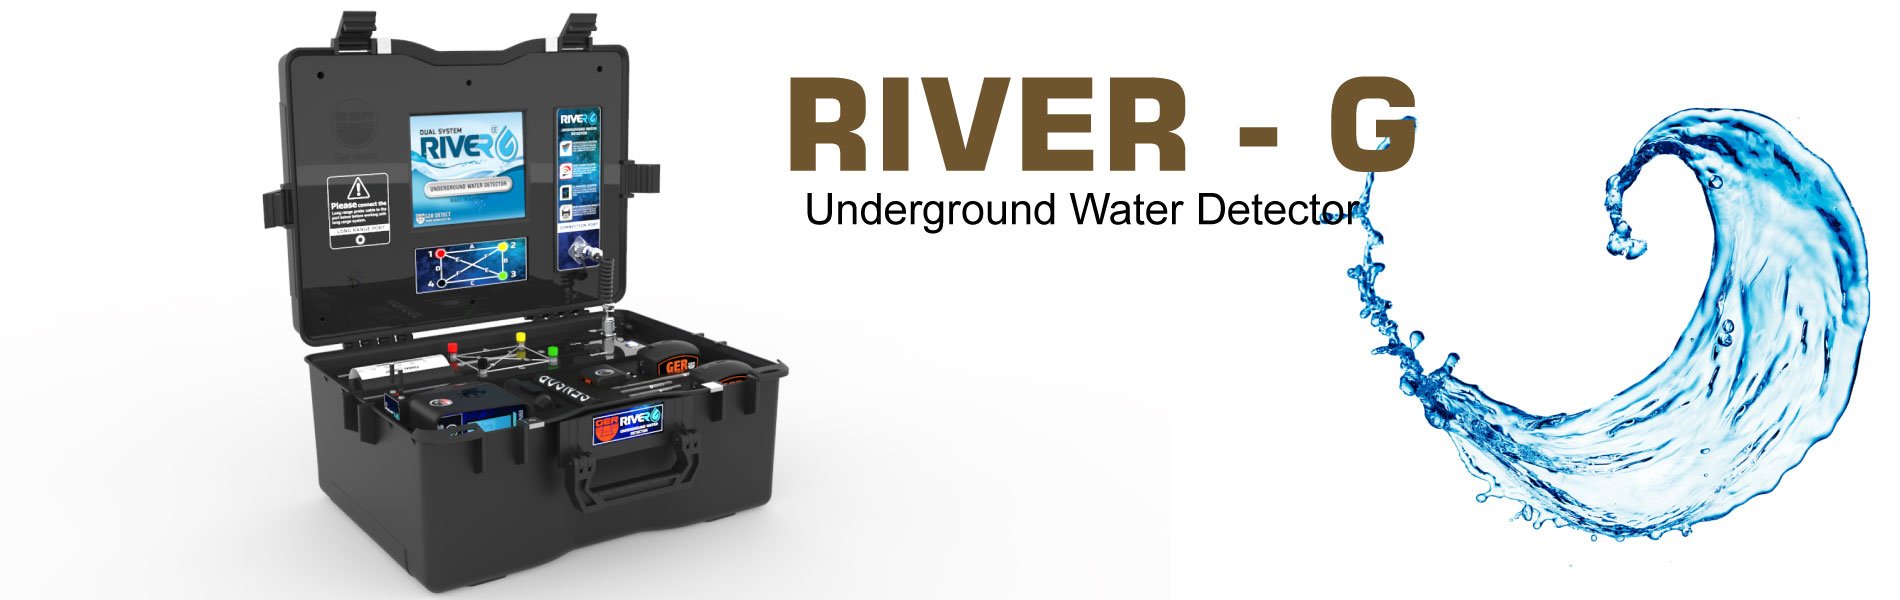 river-g-3-systems-water-detector-device